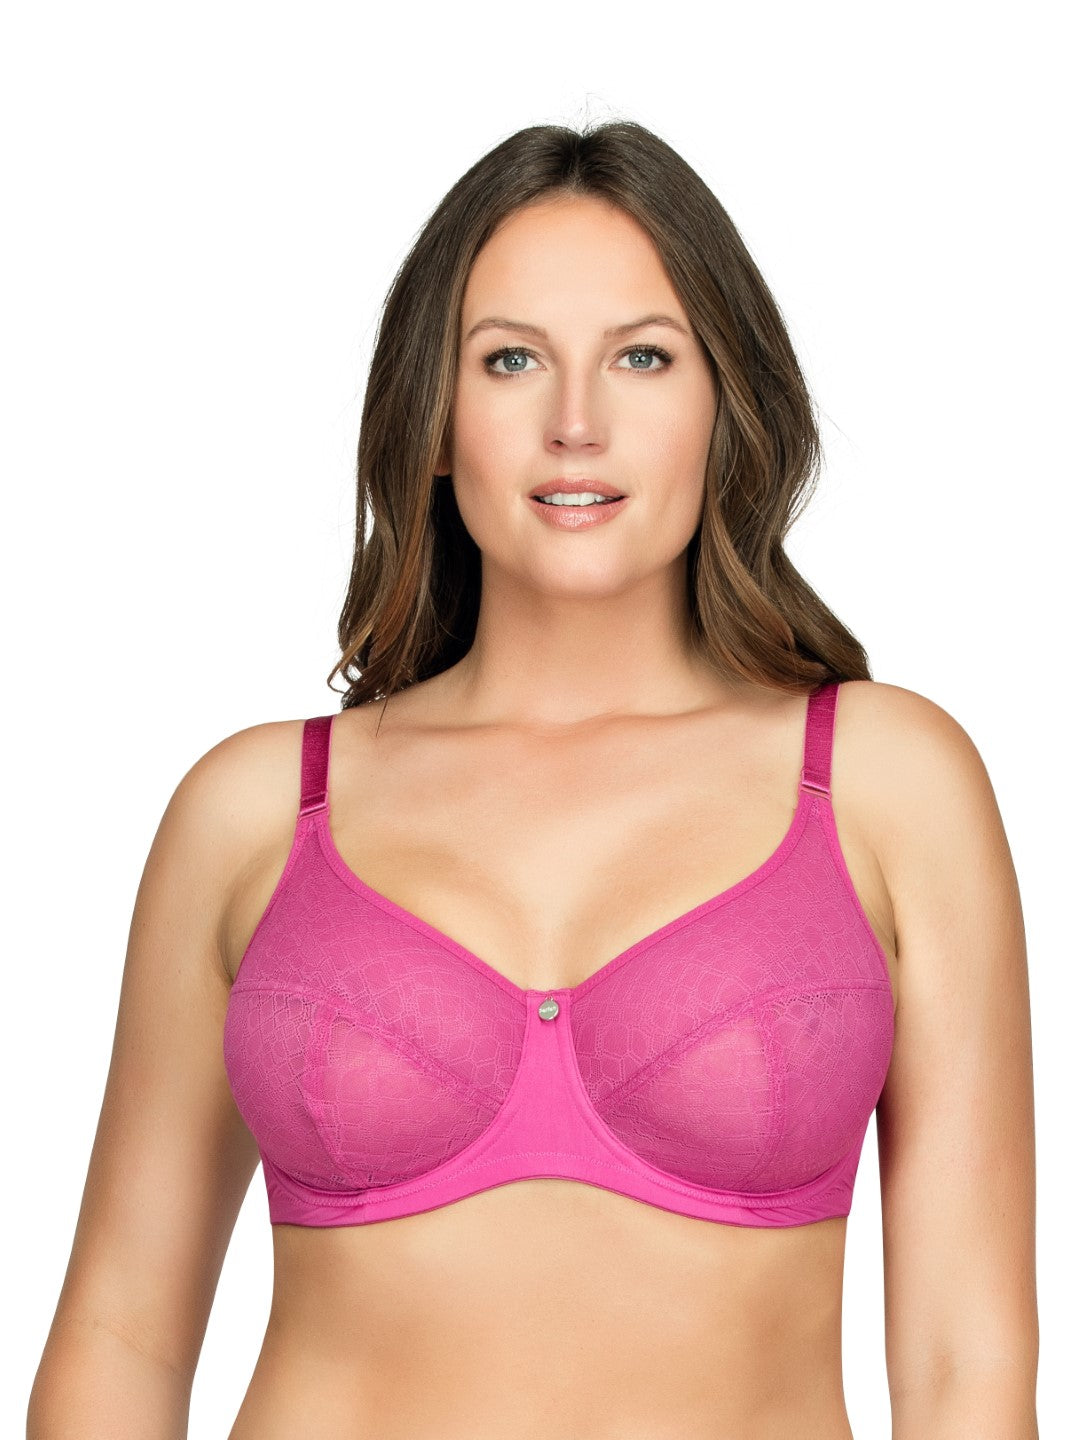 IFG - Uplift your confidence with our full-coverage bra, designed for  unbeatable support and a seamless fit. Product features: Young Miss Sizes:  30B - 38B Available in different colors For queries and